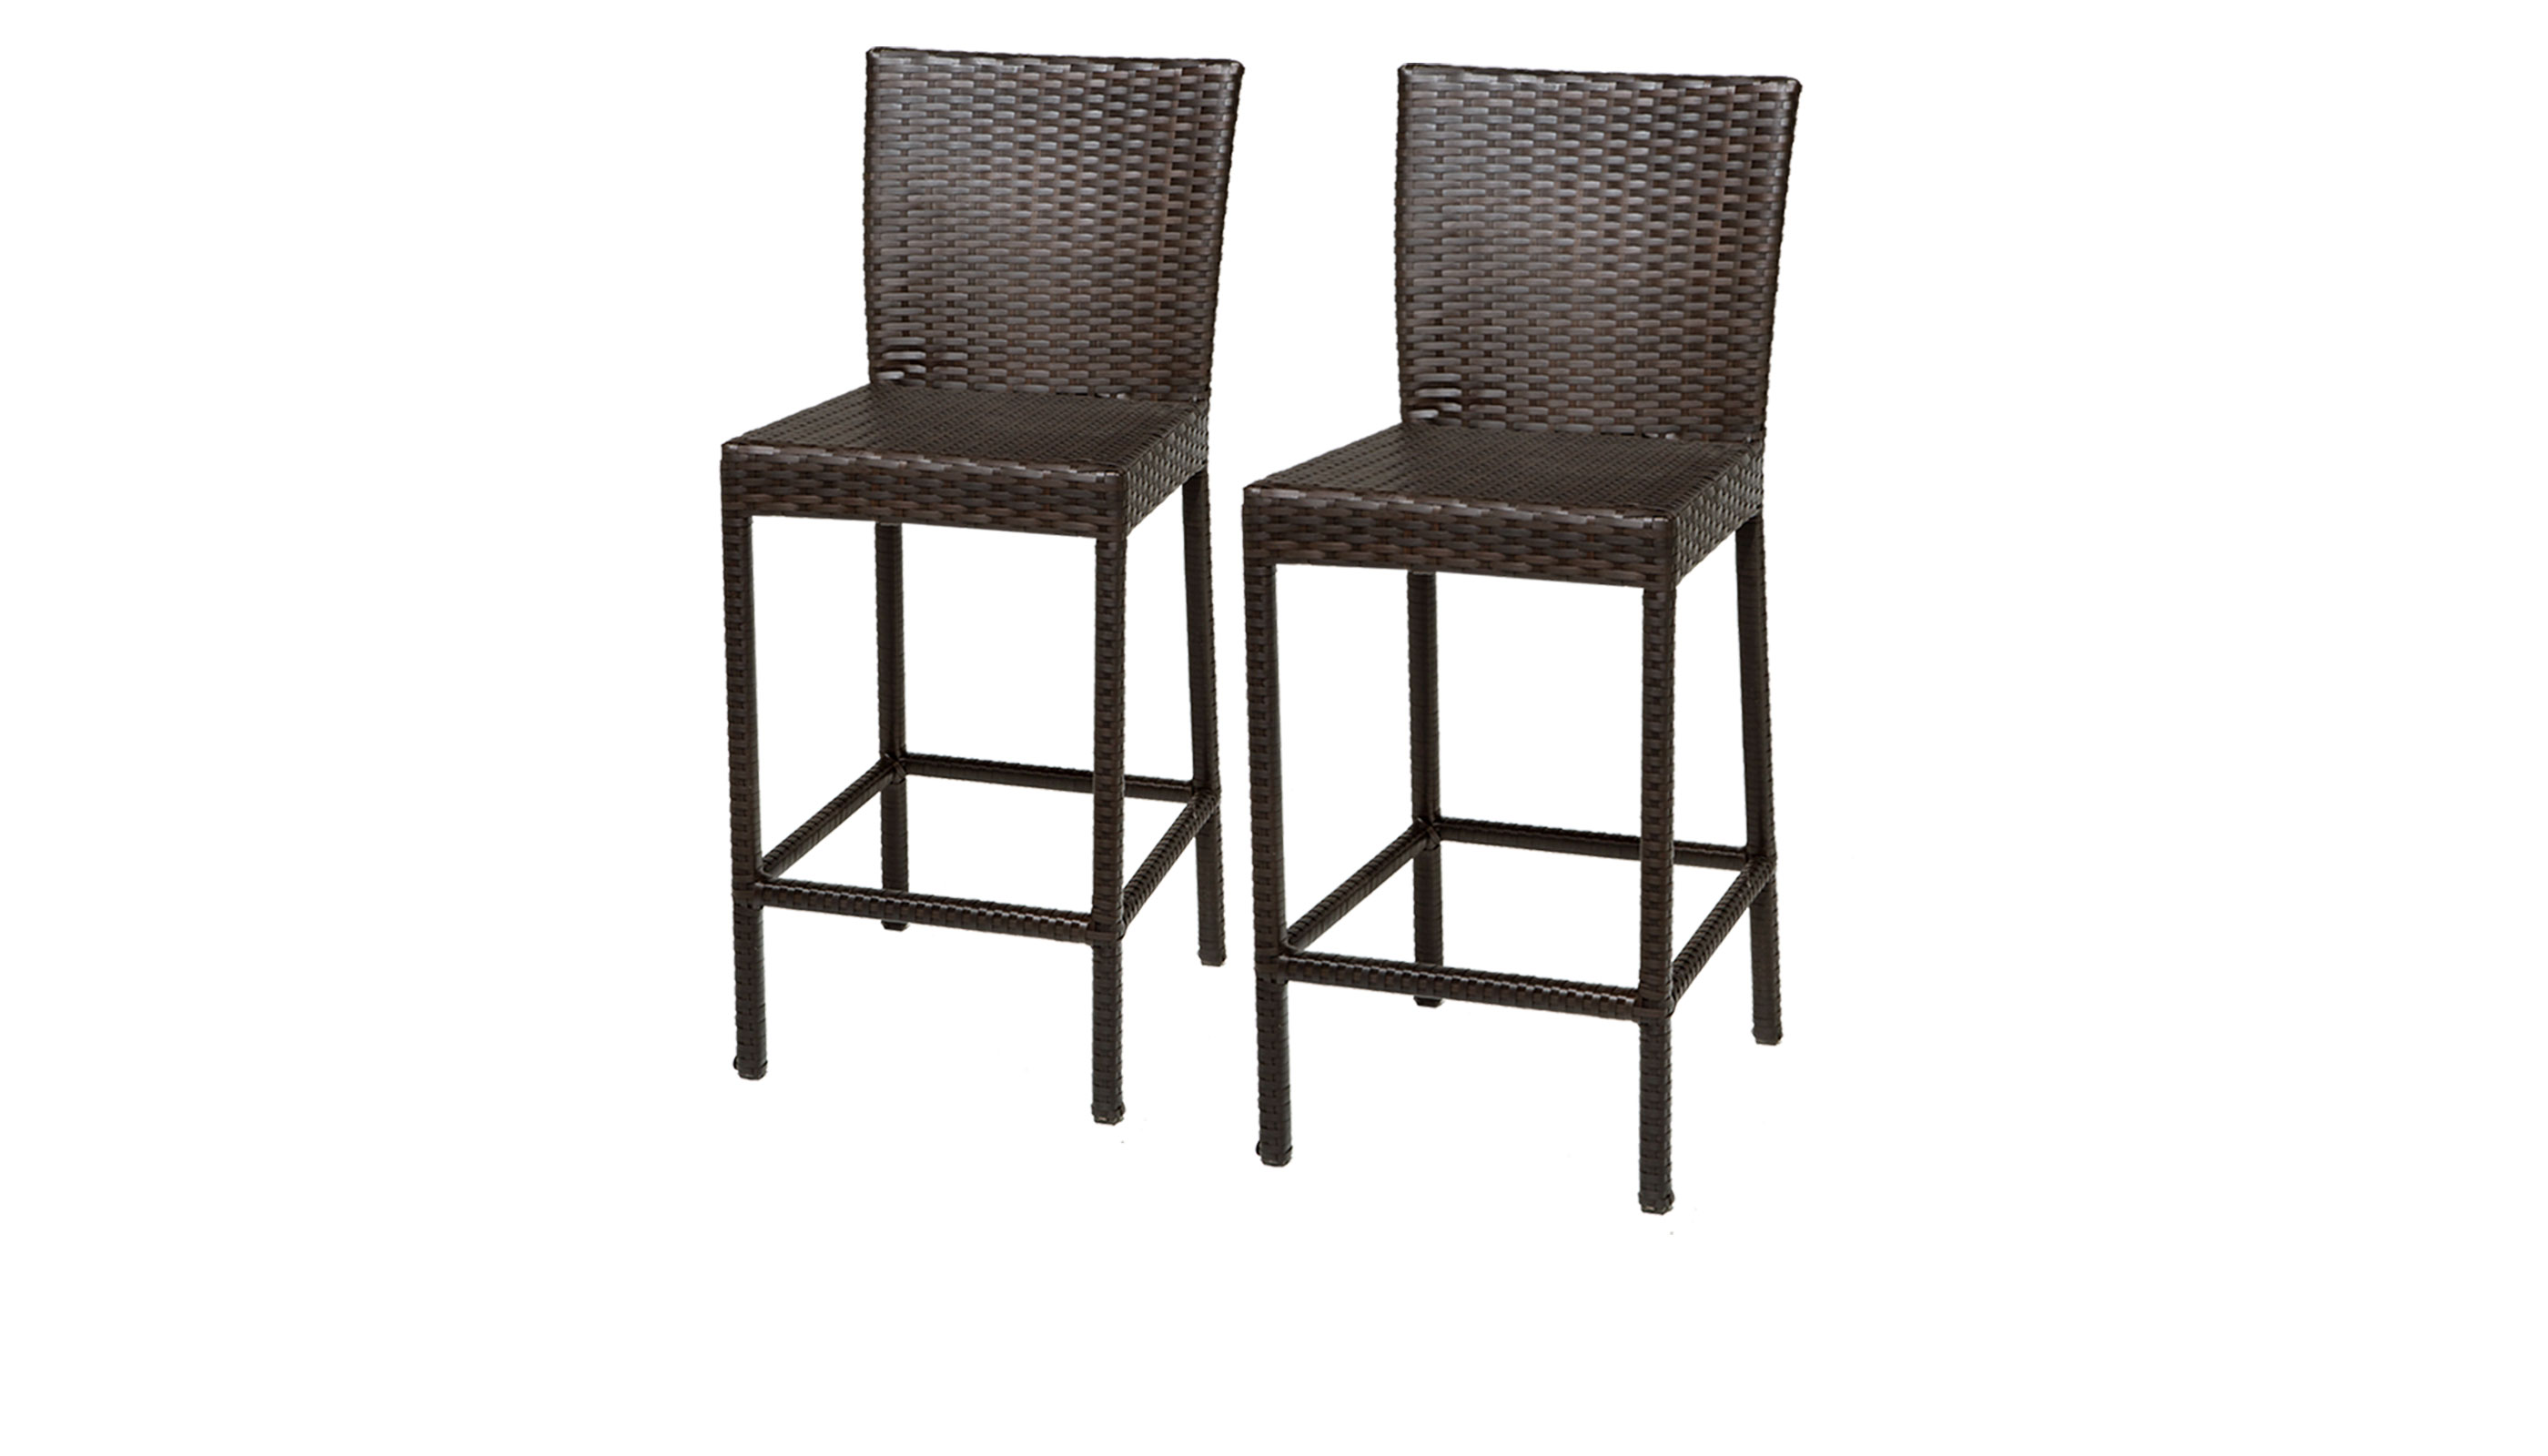 Barbados Bar Table Set with Cart, Basket, and 2 Barstools 5 Piece Outdoor Wicker Patio Furniture - TK Classics